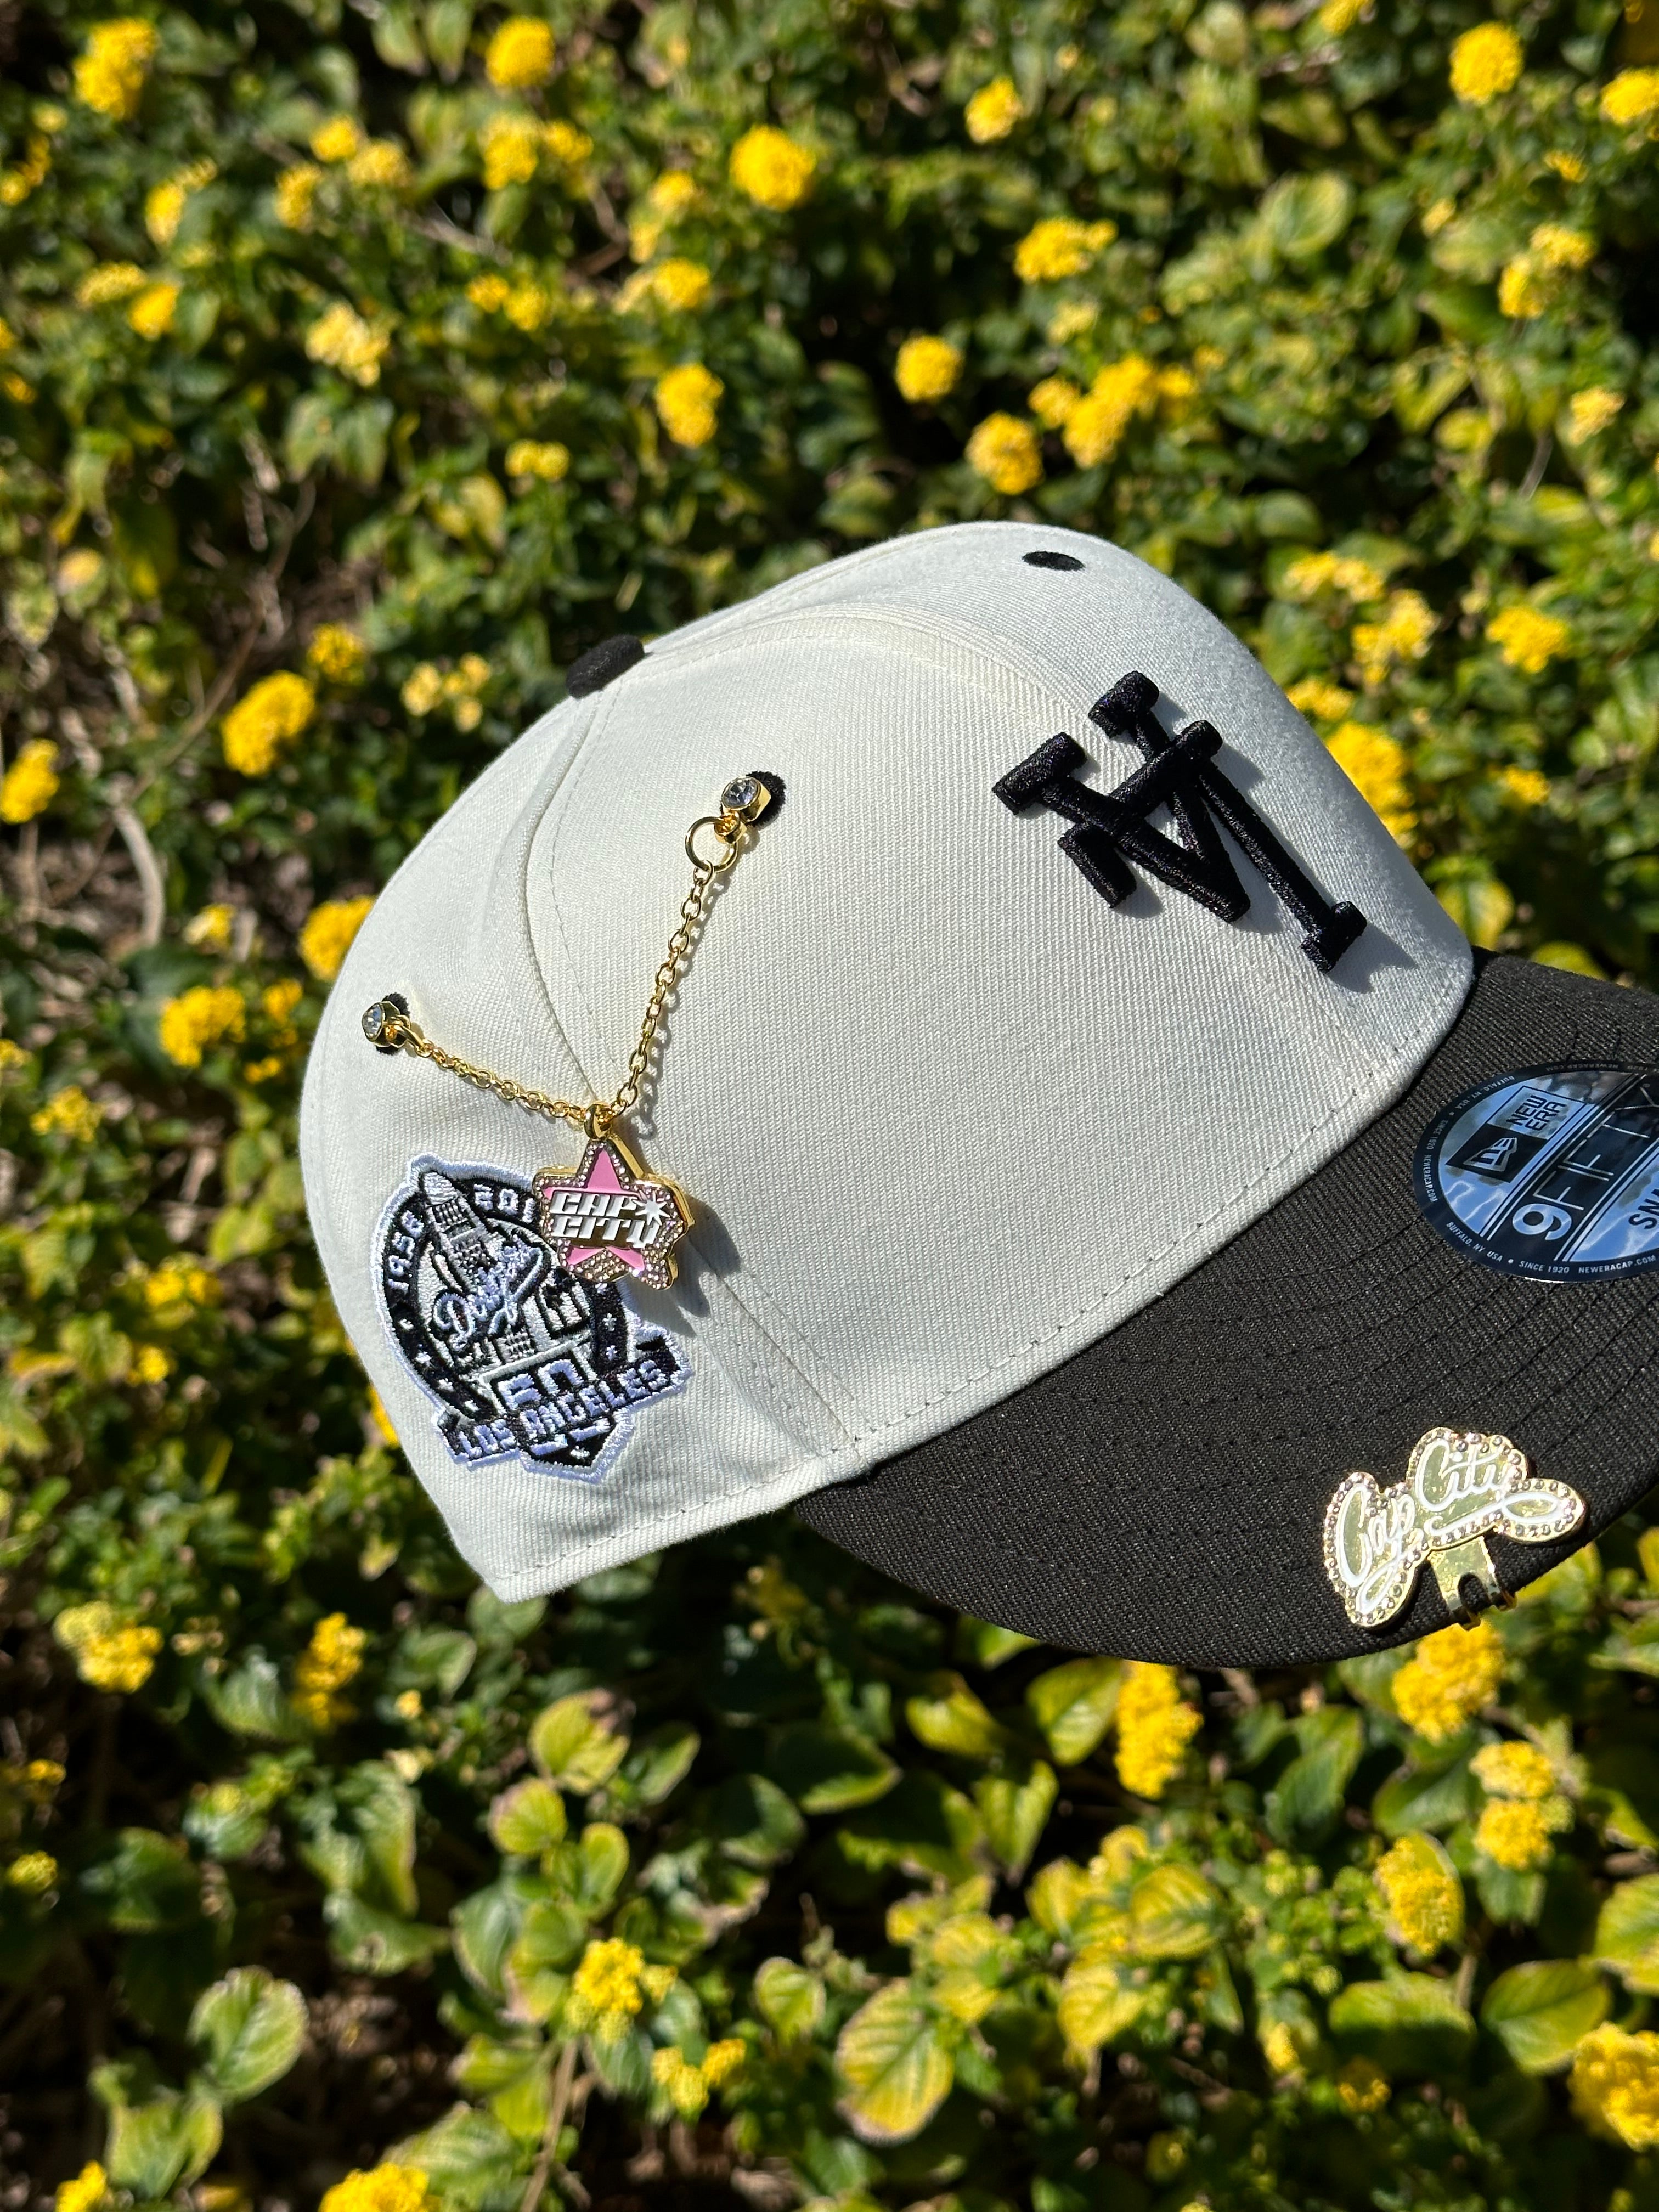 NEW ERA EXCLUSIVE 9FIFTY CHROME WHITE/BLACK UPSIDE DOWN LOS ANGELES DODGERS SNAPBACK W/ 60TH ANNIVERSARY SIDE PATCH